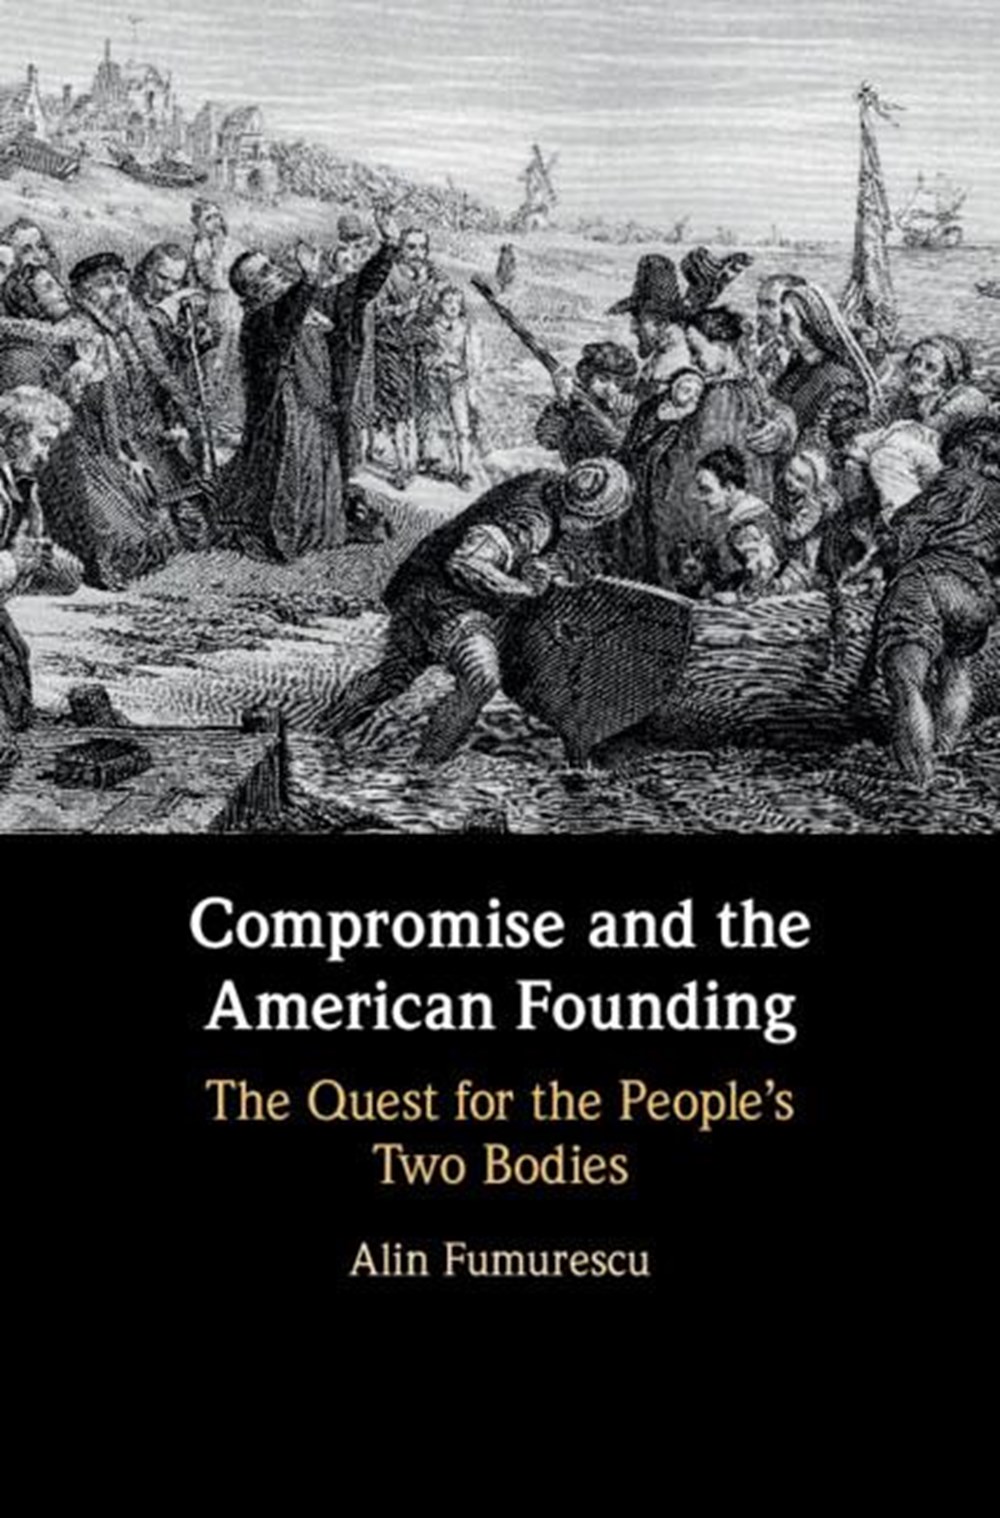 Compromise and the American Founding: The Quest for the People's Two Bodies